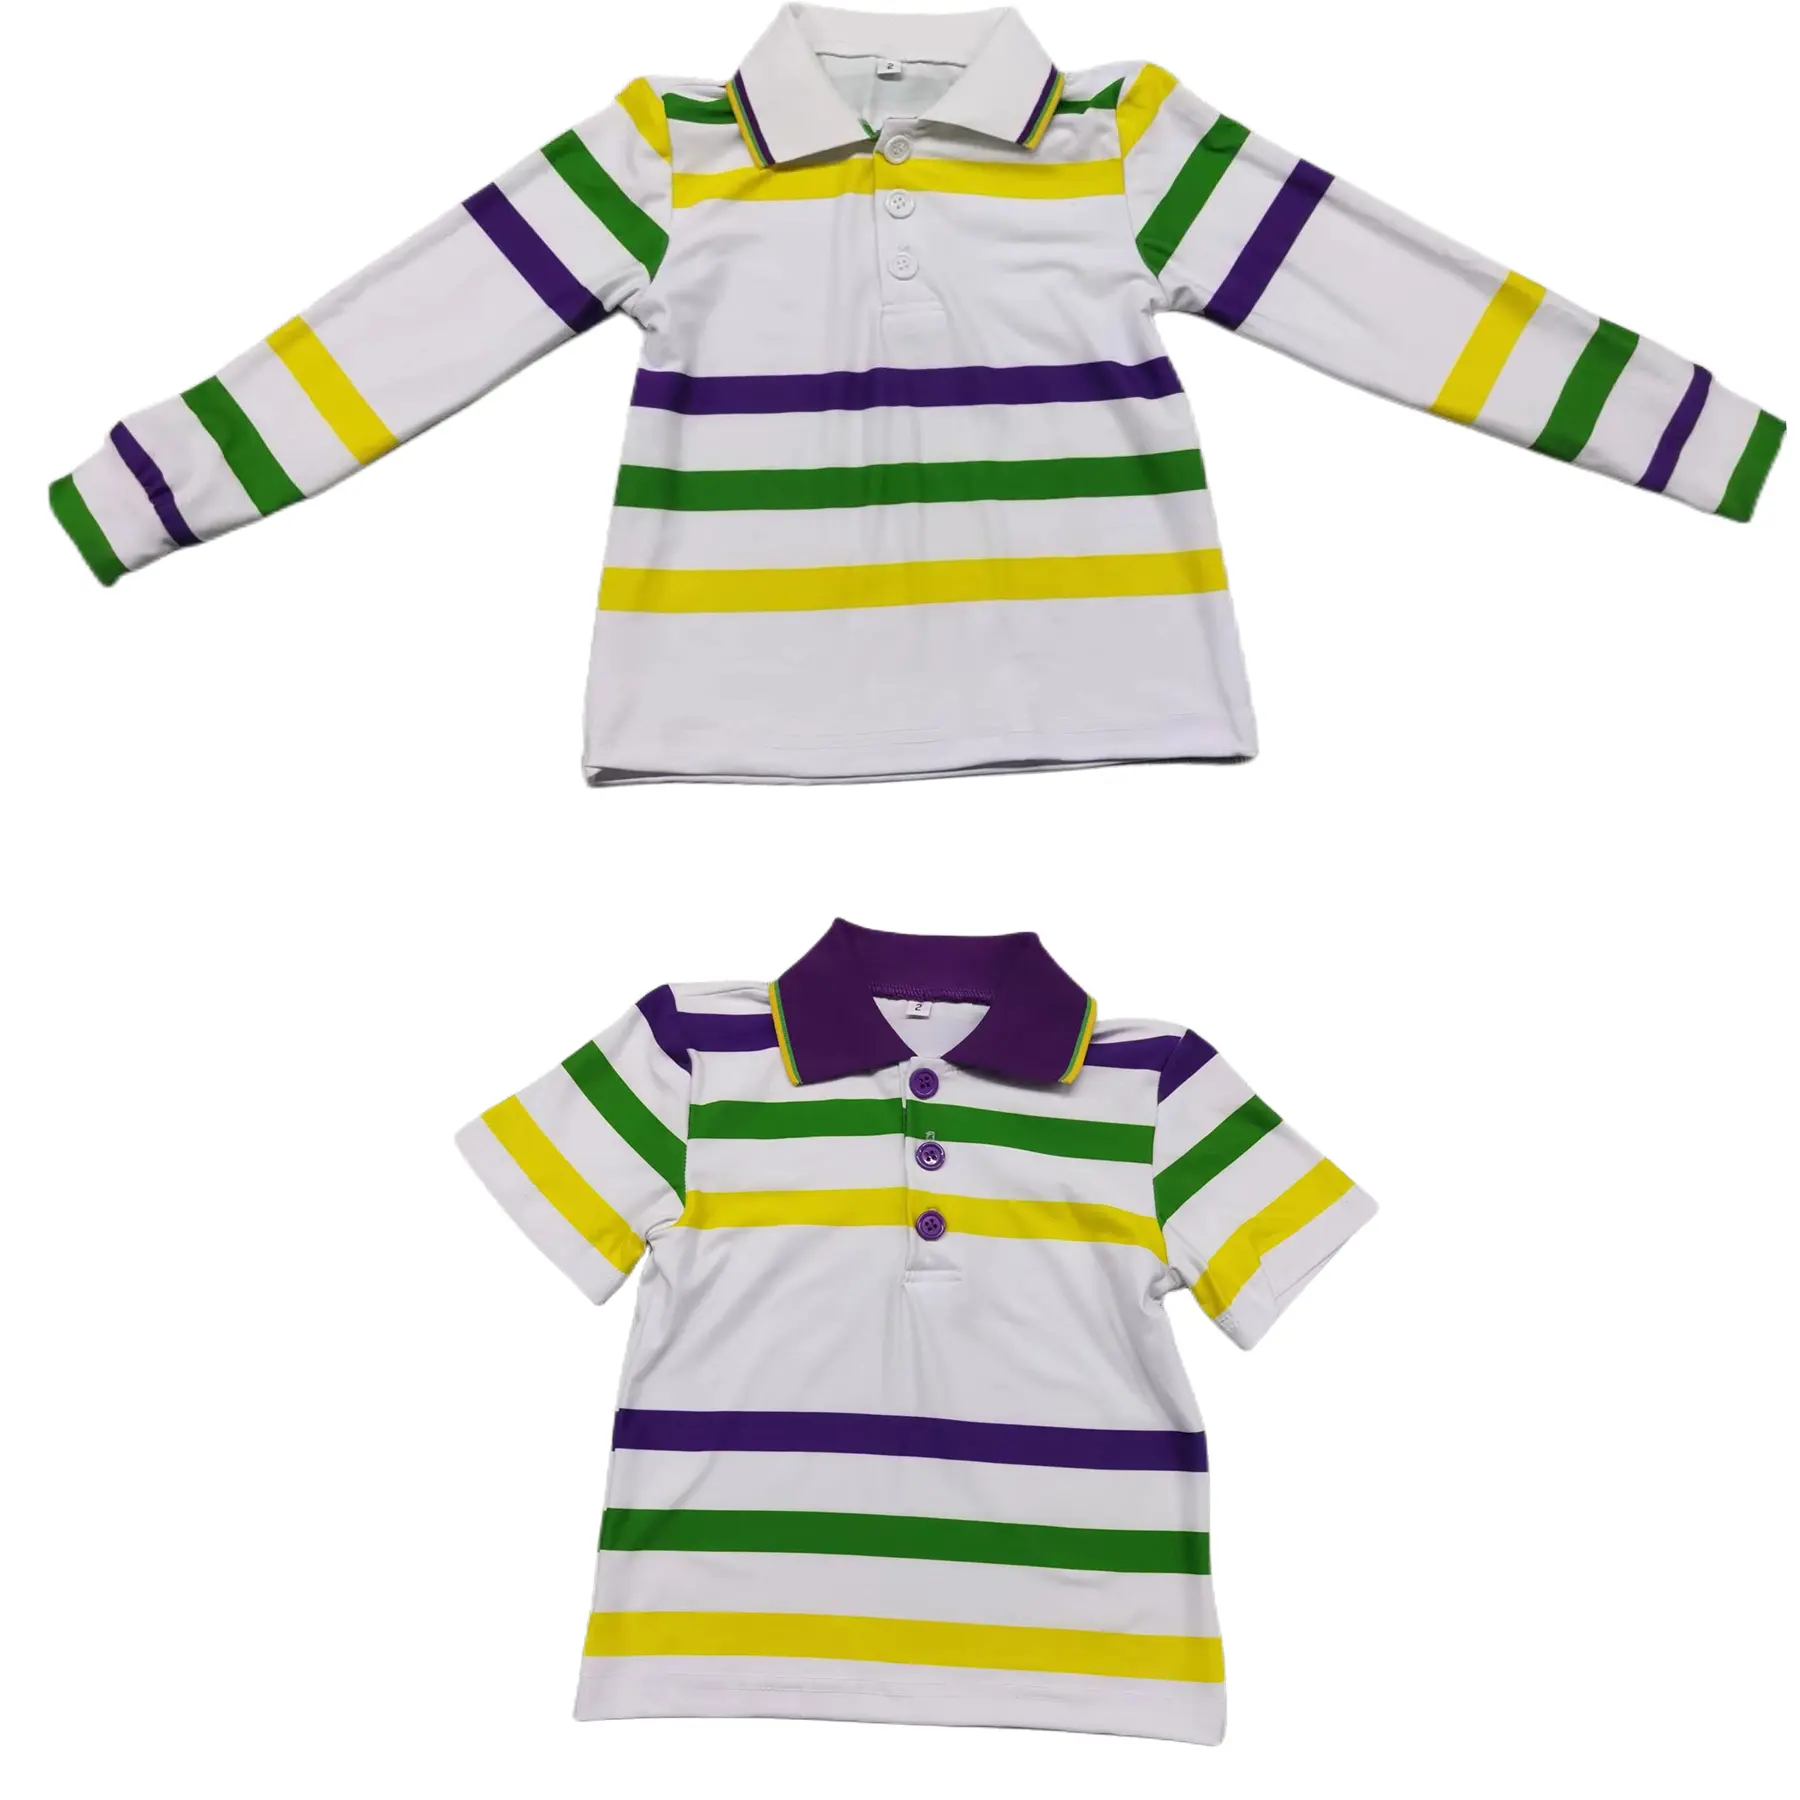 new arrival Fat Tuesday Gift Shirt Funny Mardi Gras Carnival Lover Shirt New stripe Tee